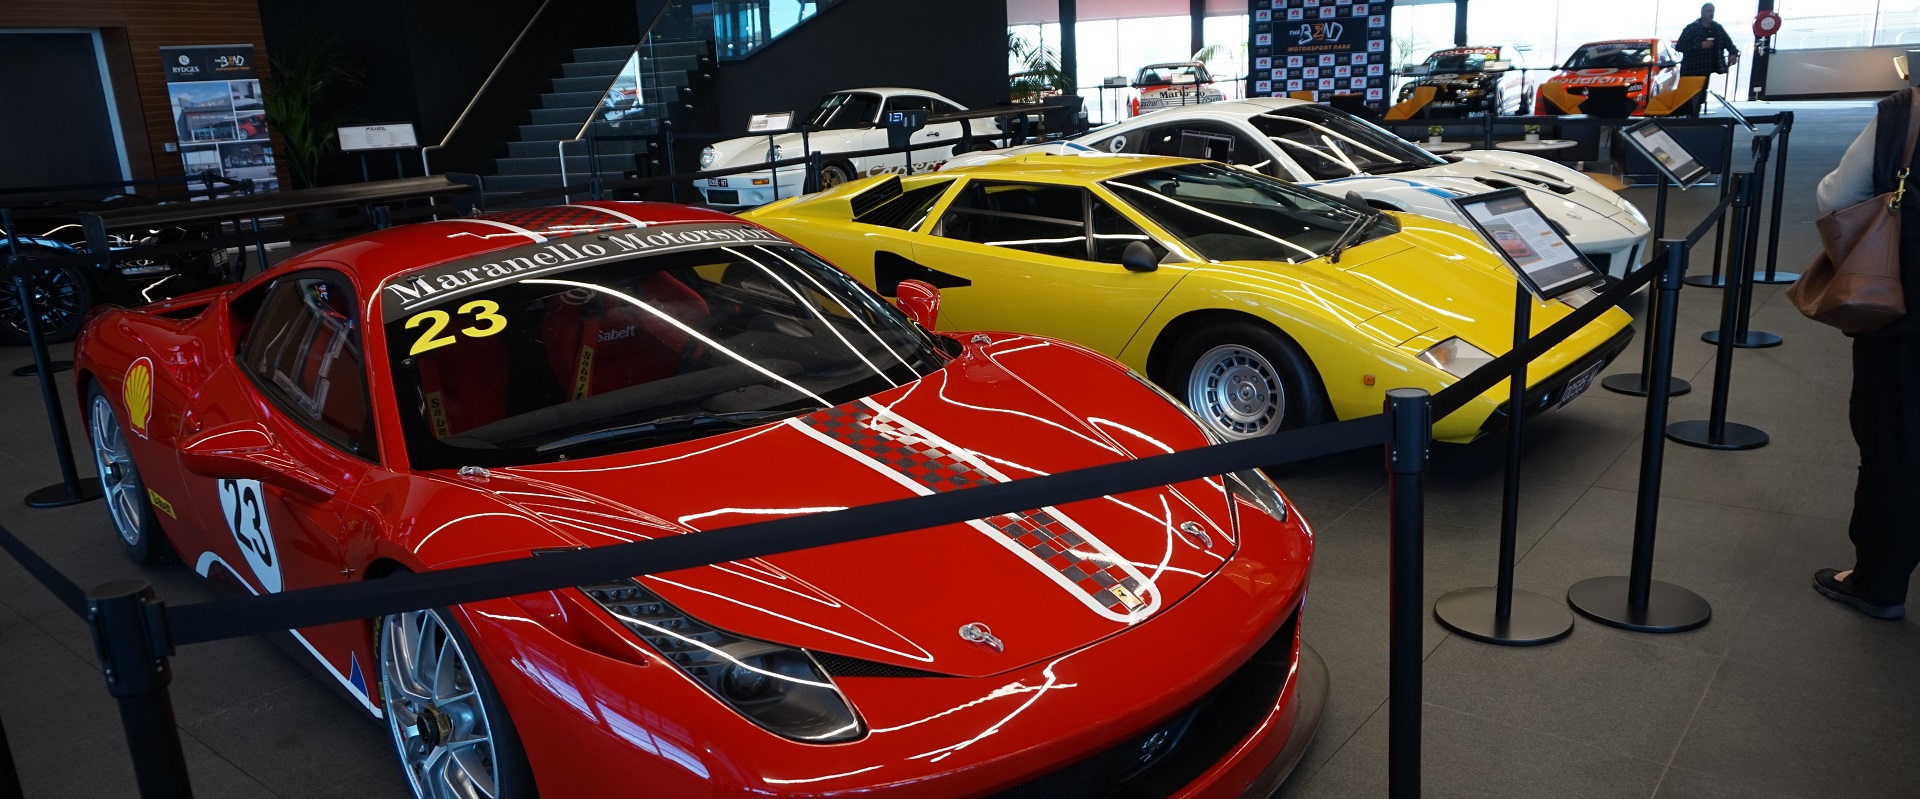 Upon entry, you'll be greeted by a stable of supercars.